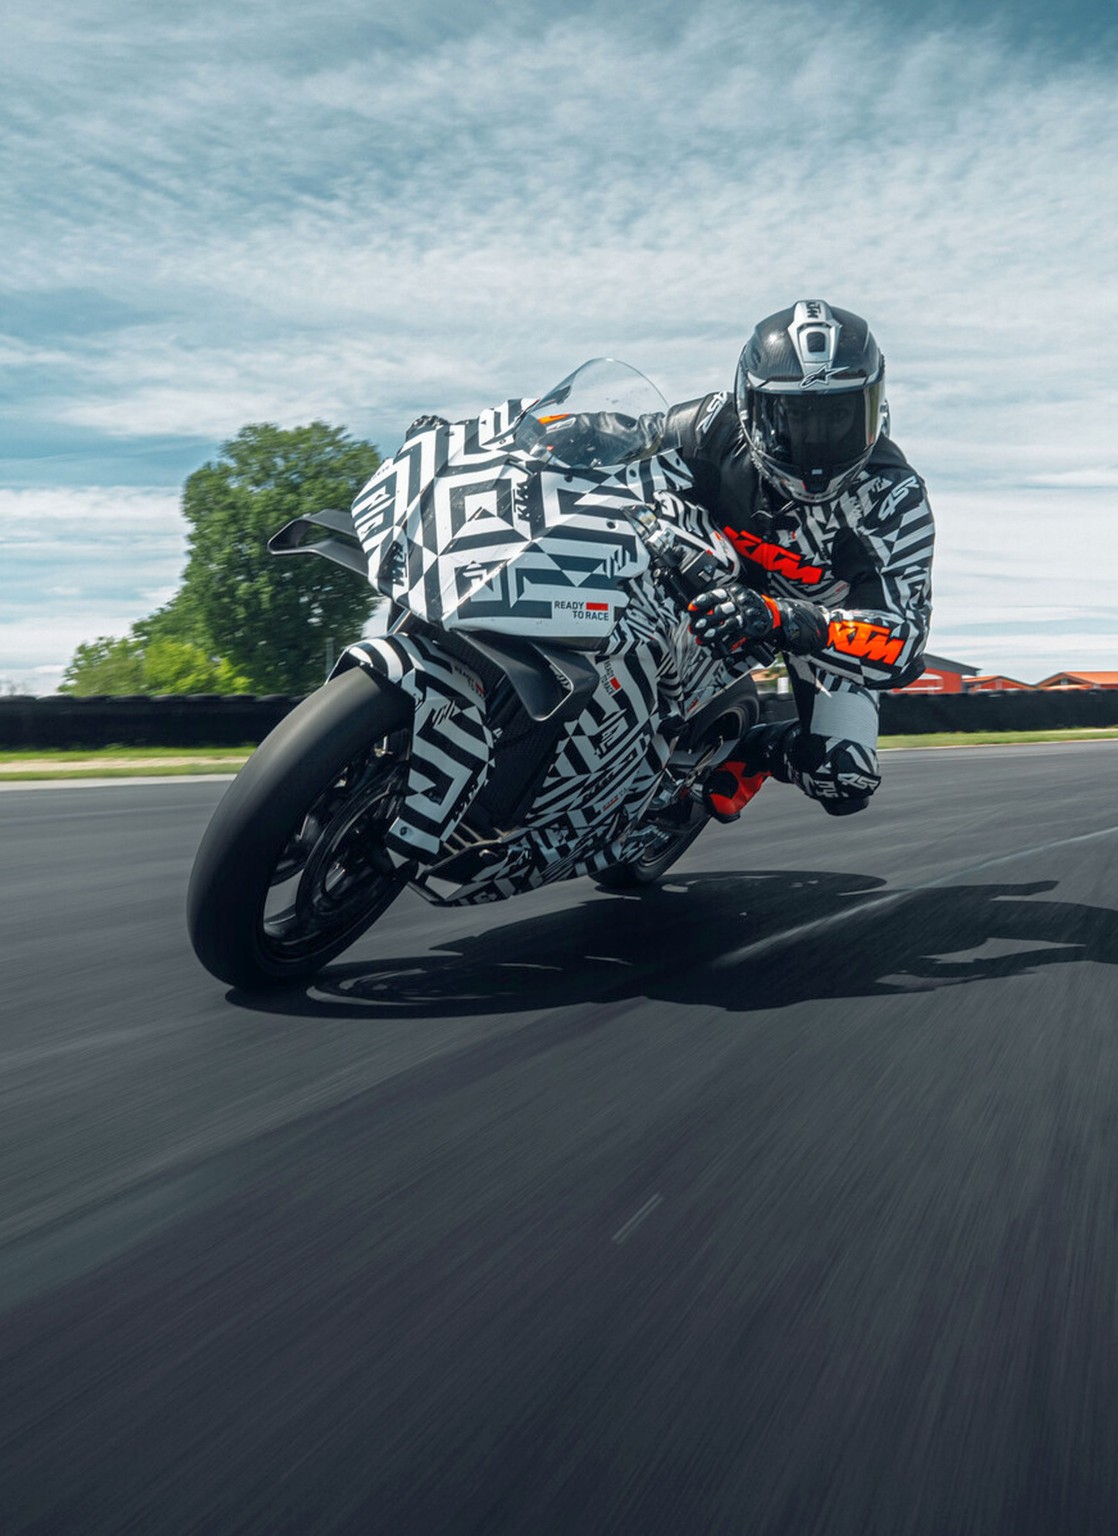 KTM 990 RC R - finally the thoroughbred sports bike for the road! - Image 20